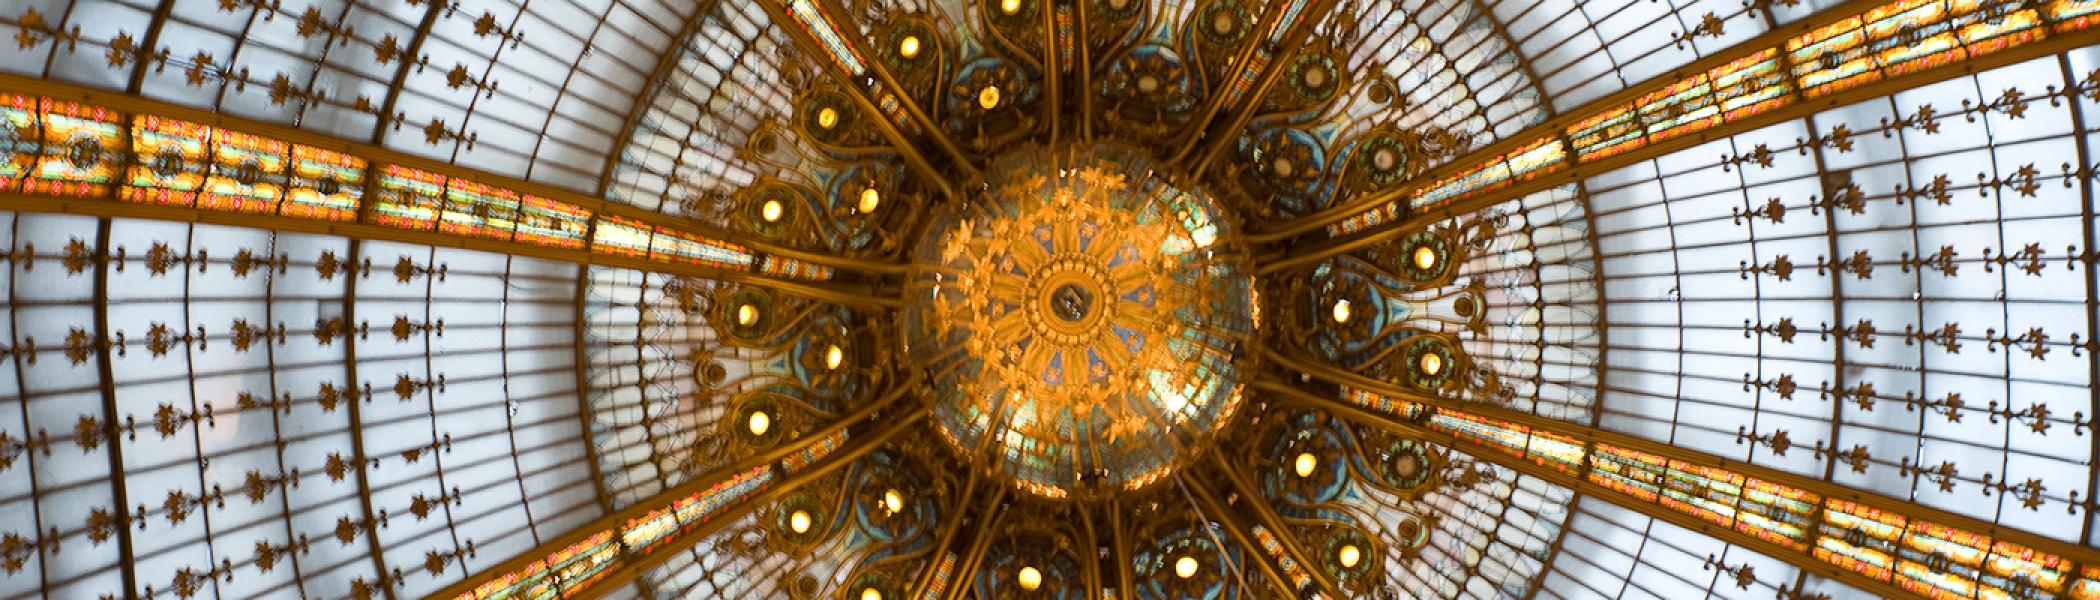 Looking up and intricate stained glass and gold ceiling with an ornate light in the centre. 